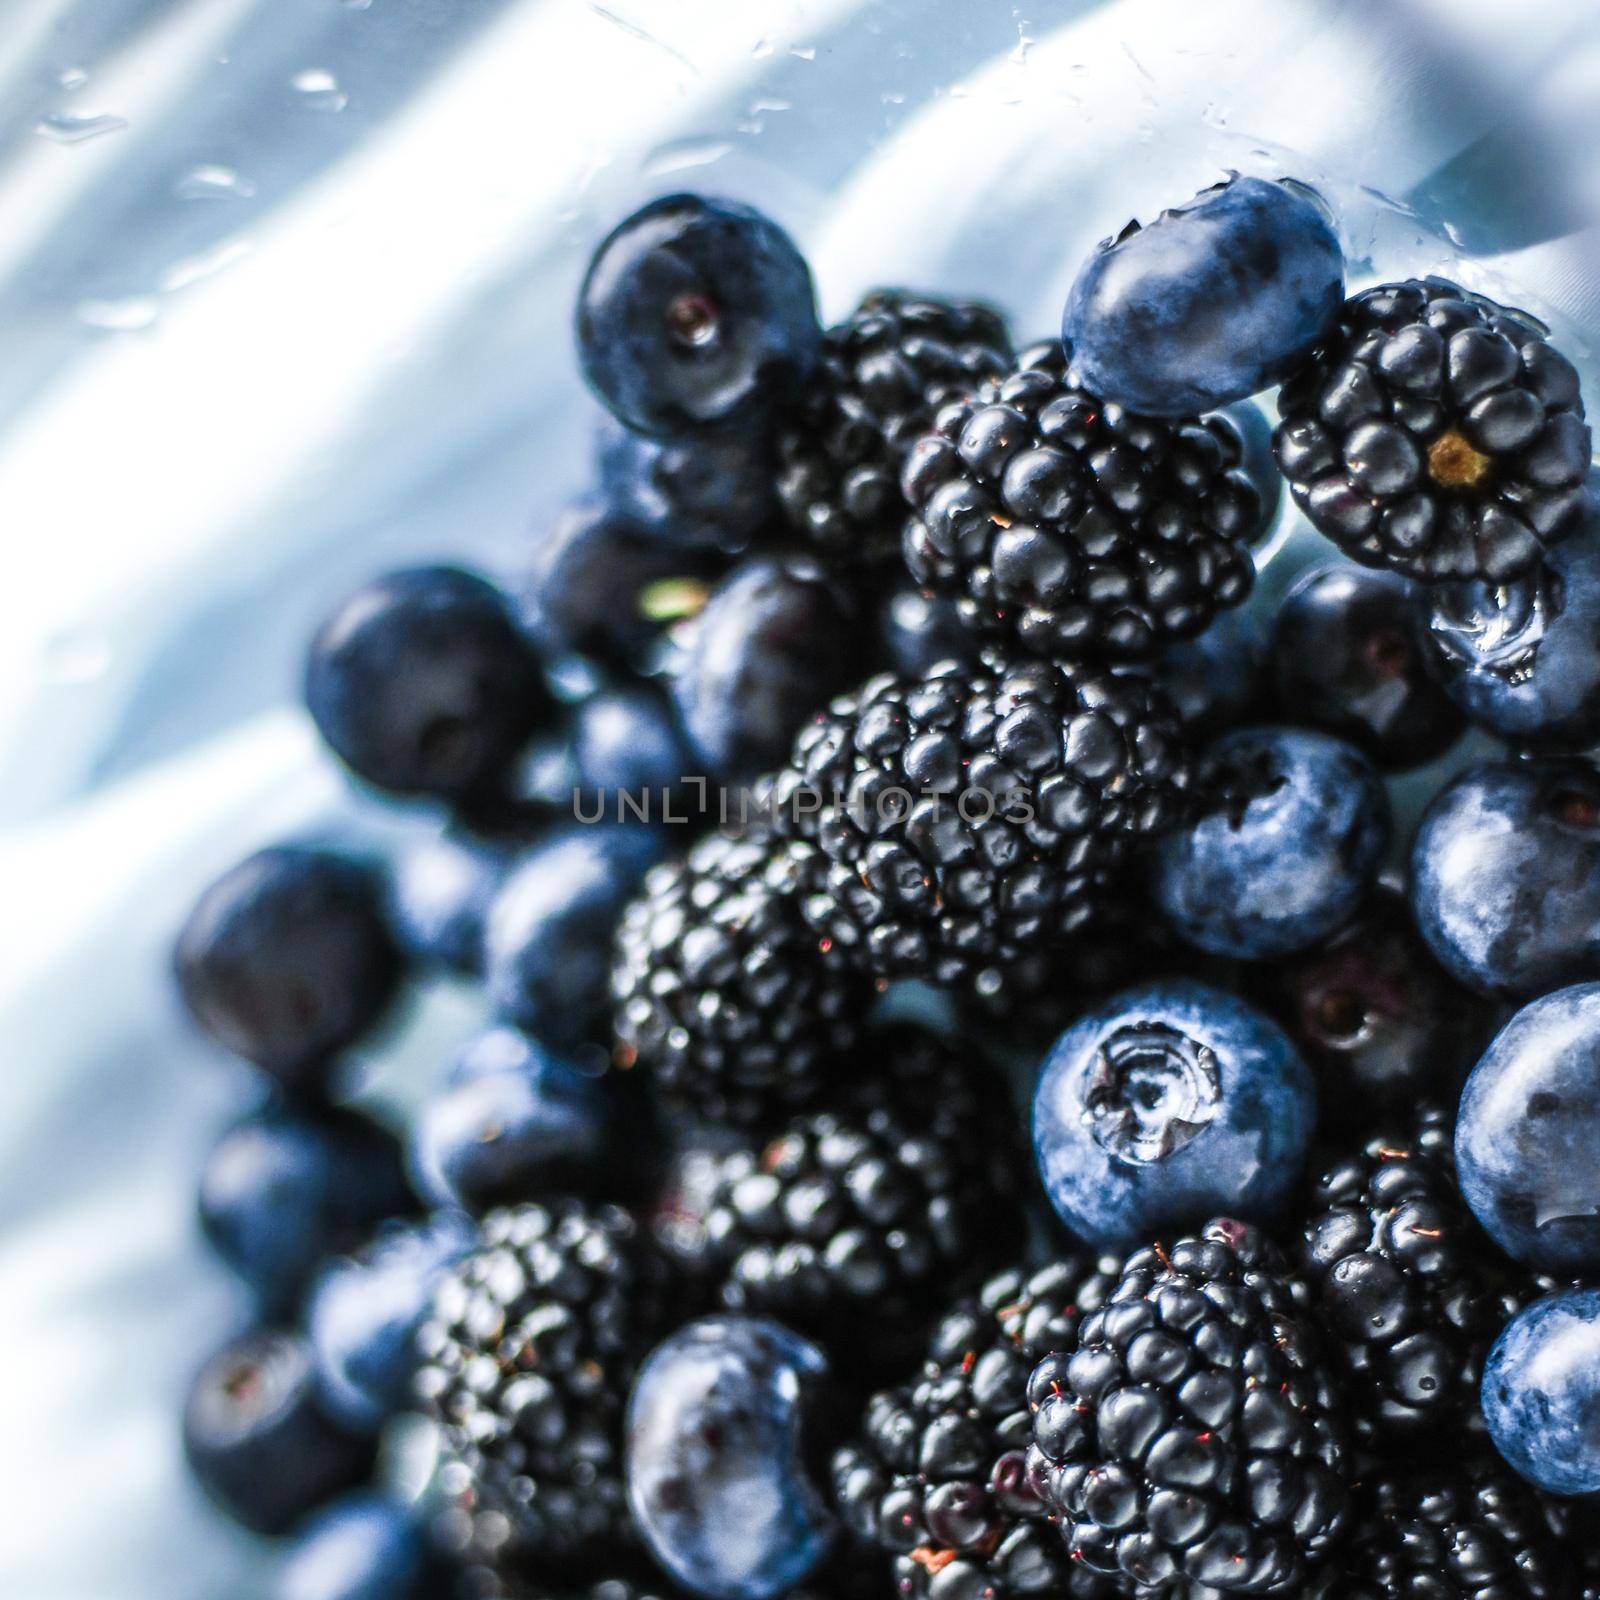 bluberries and blackberries - fresh fruits and healthy eating styled concept, elegant visuals